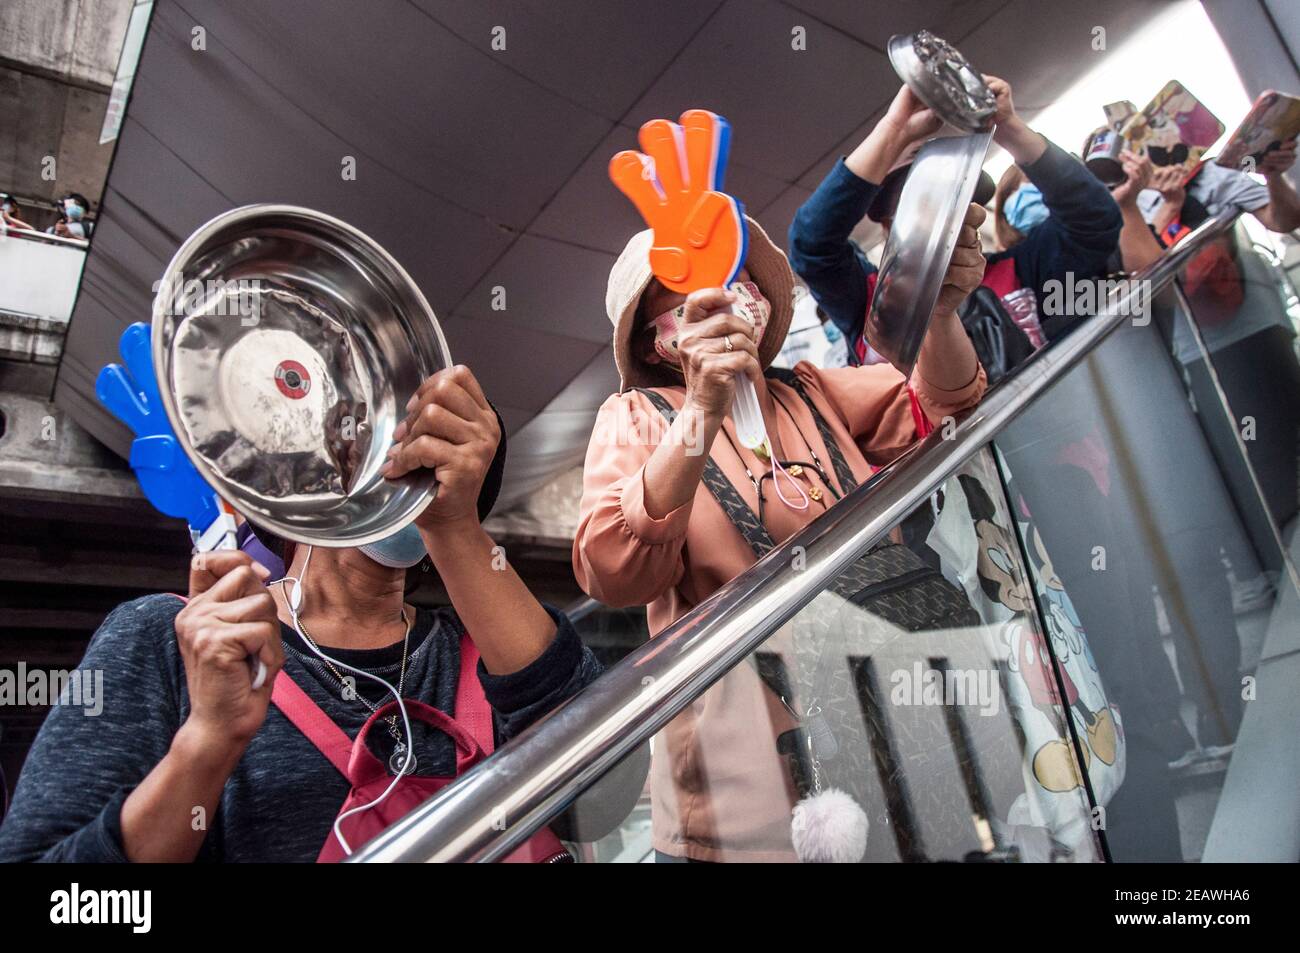 Pro-democracy protesters banging  saucepans during the demonstration.Pro-democracy protesters and activists attend a rally by banging kitchen utensils to protest against the government and demanding to abolish the lese majesty law (article 112 of the Thai criminal code) at Bangkok Art and Culture Center (BACC). Stock Photo